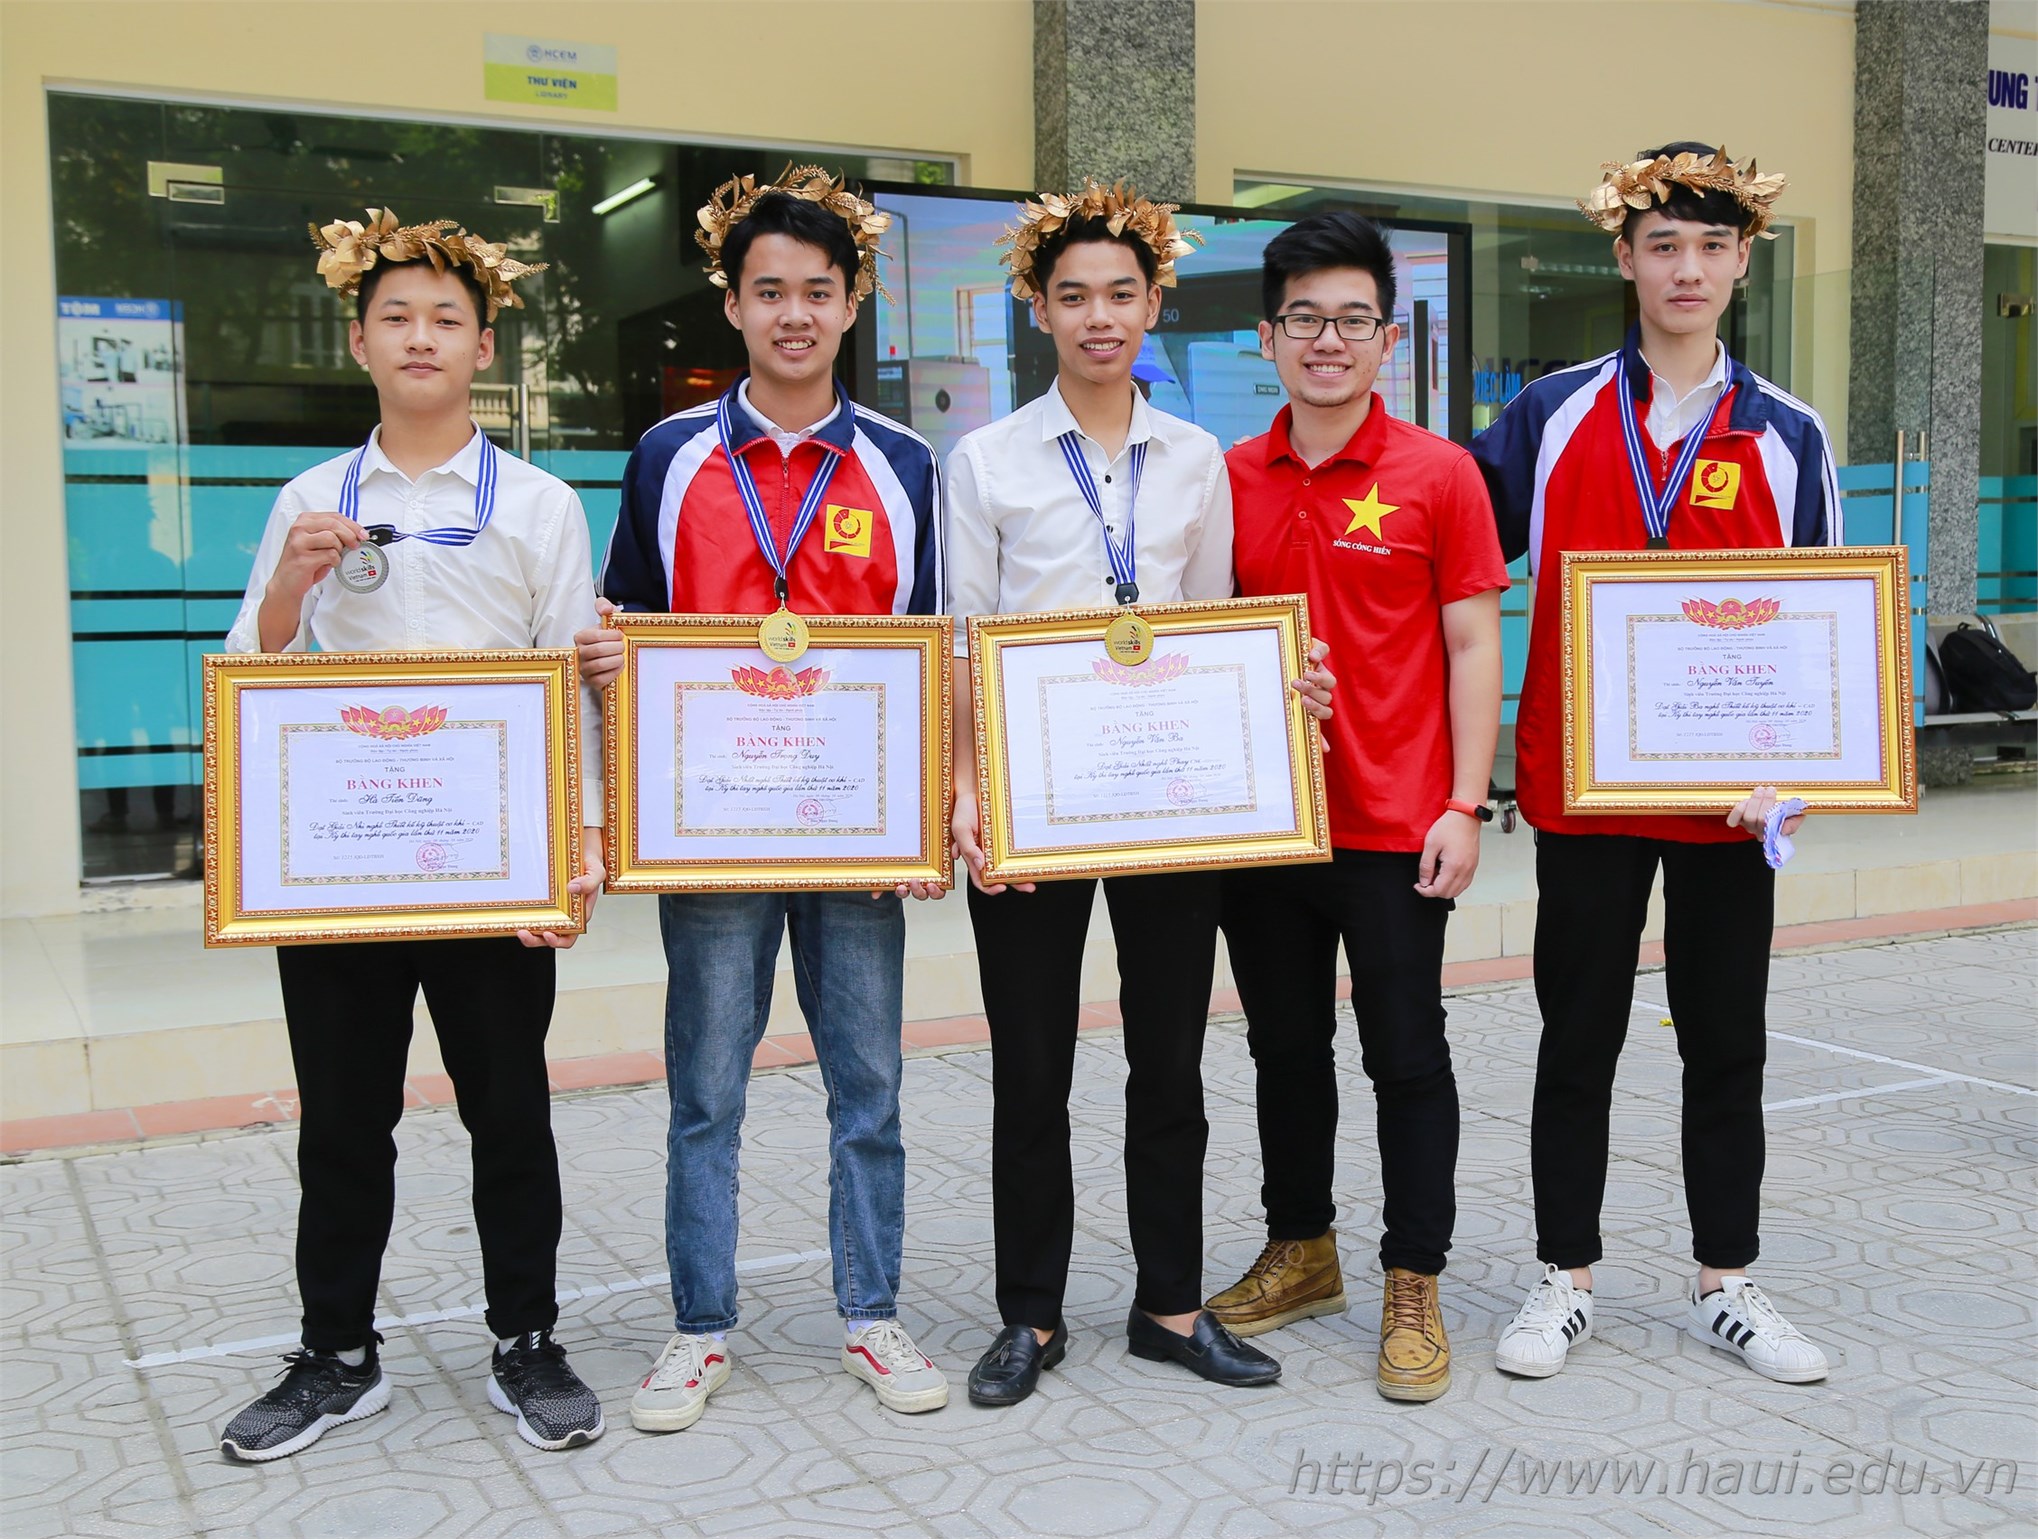 HaUI students won 4 Gold Medals at the National Vocational Skills Competition 2020 